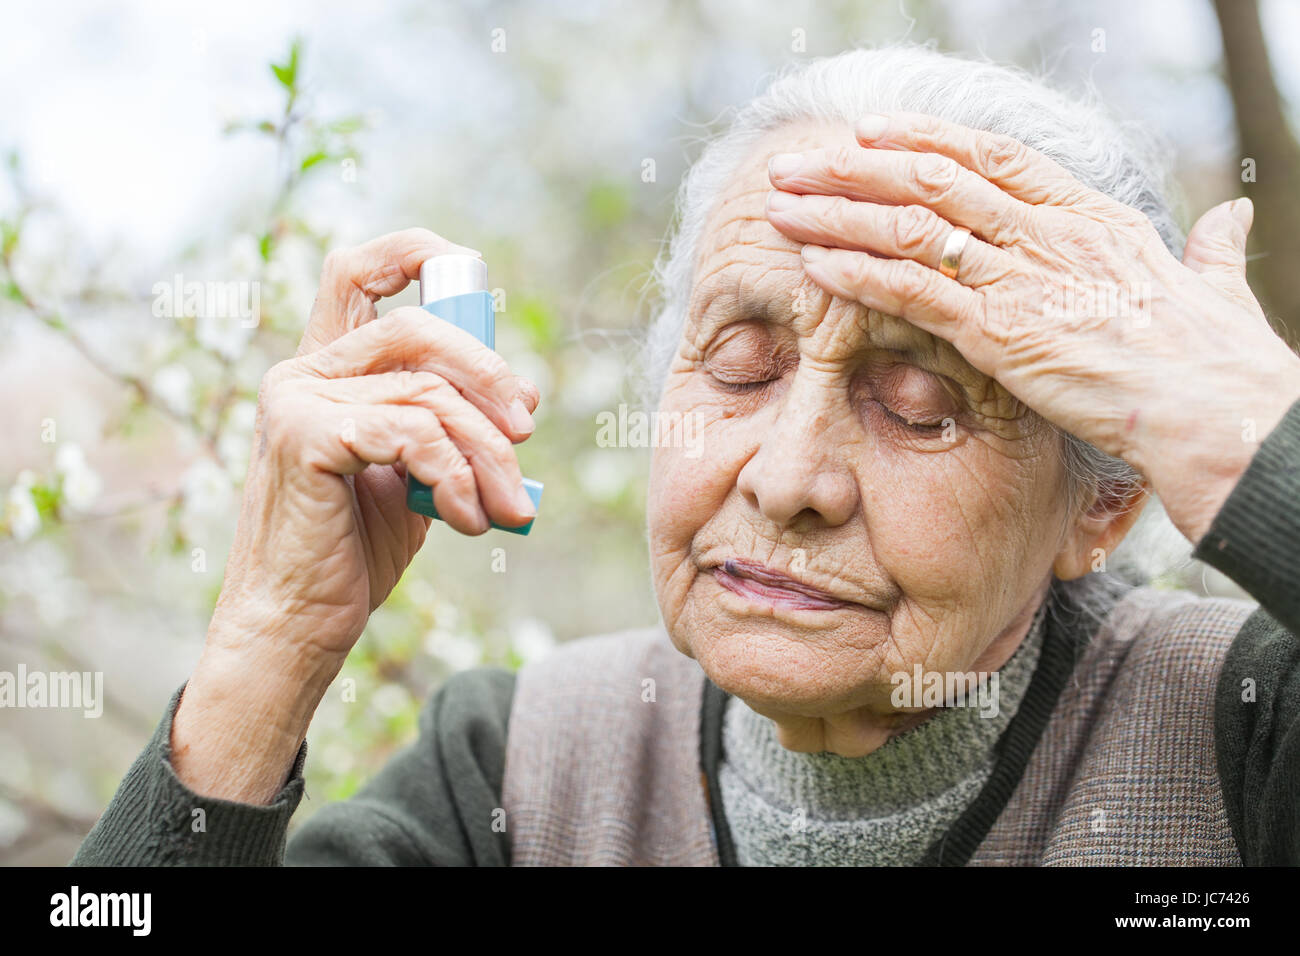 Close up picture of an elderly woman having an asthma attack, holding a bronchodilator Stock Photo